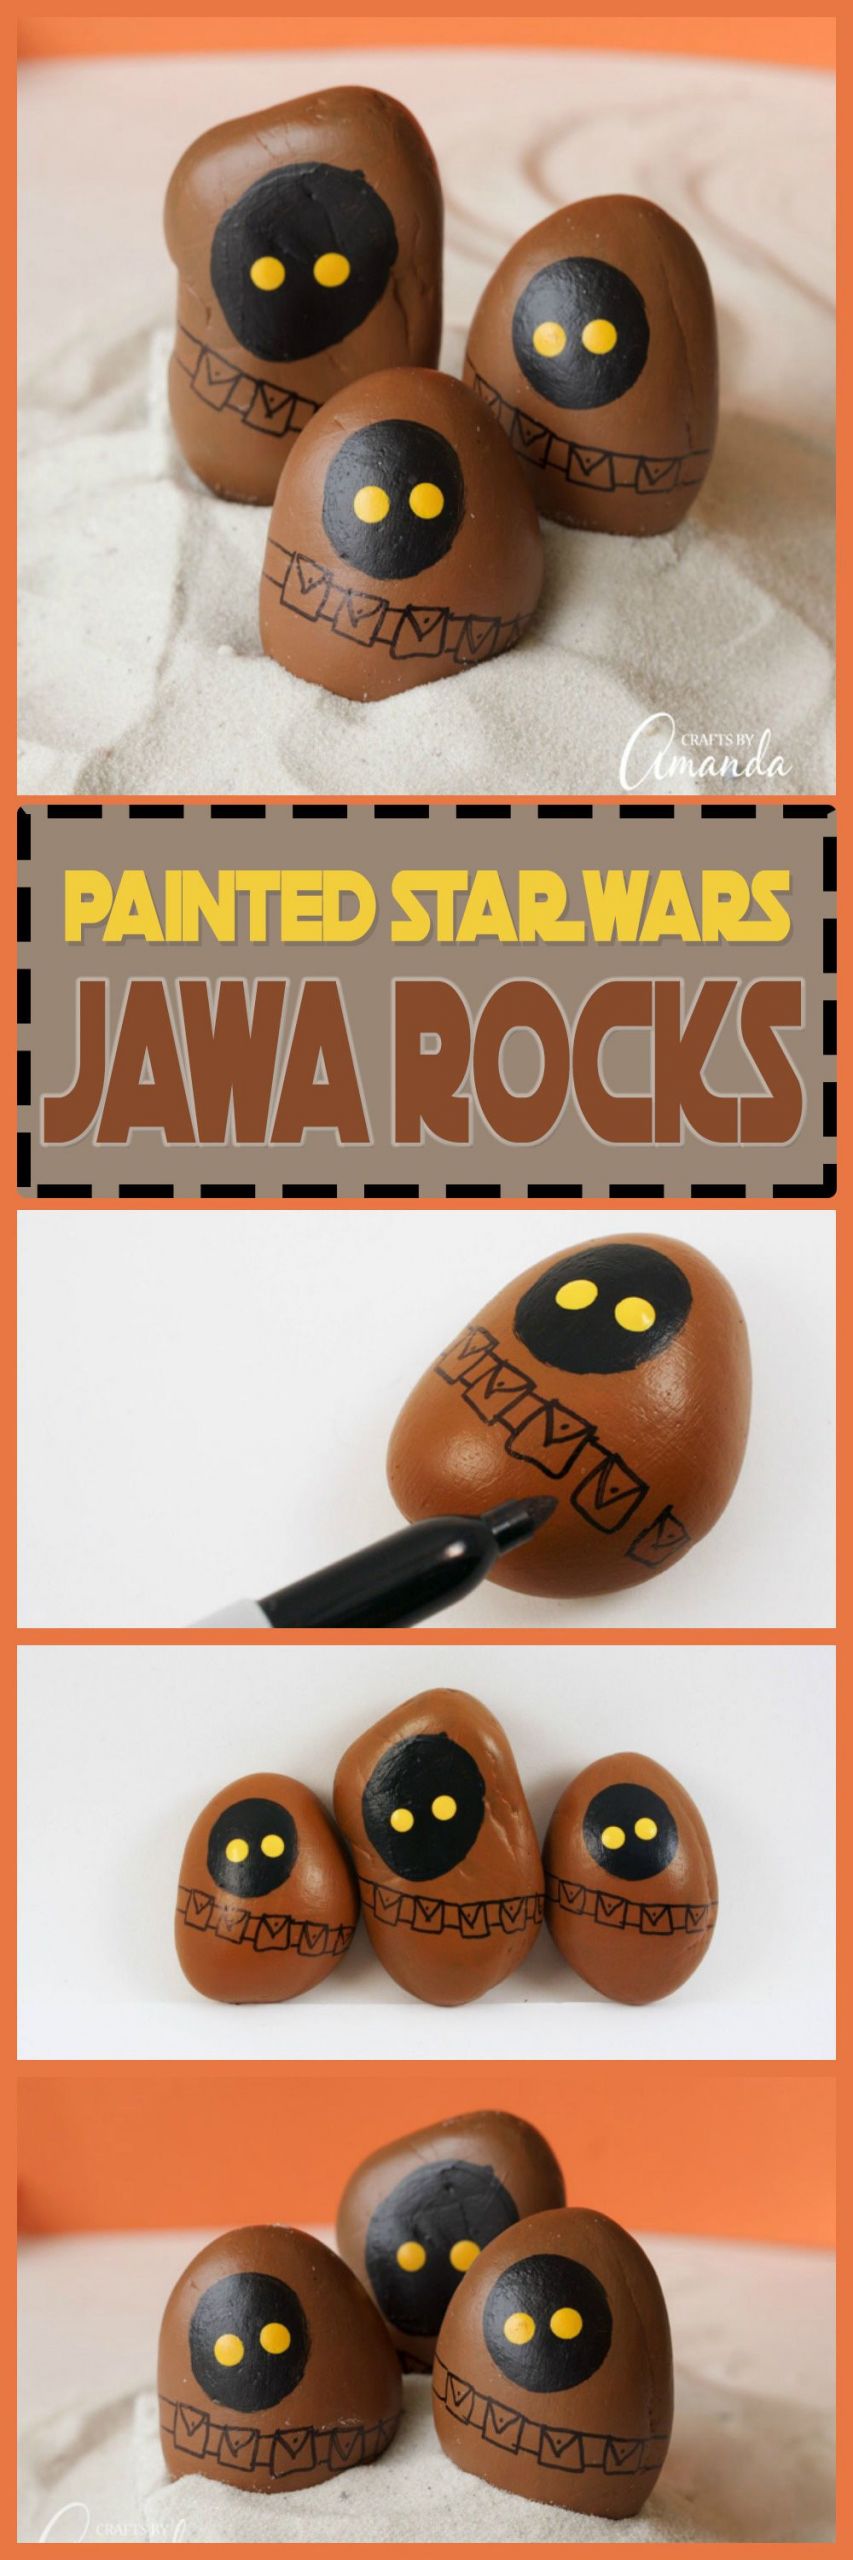 Rock Crafts For Adults
 These Star Wars Jawa Rocks are a great painted rock craft